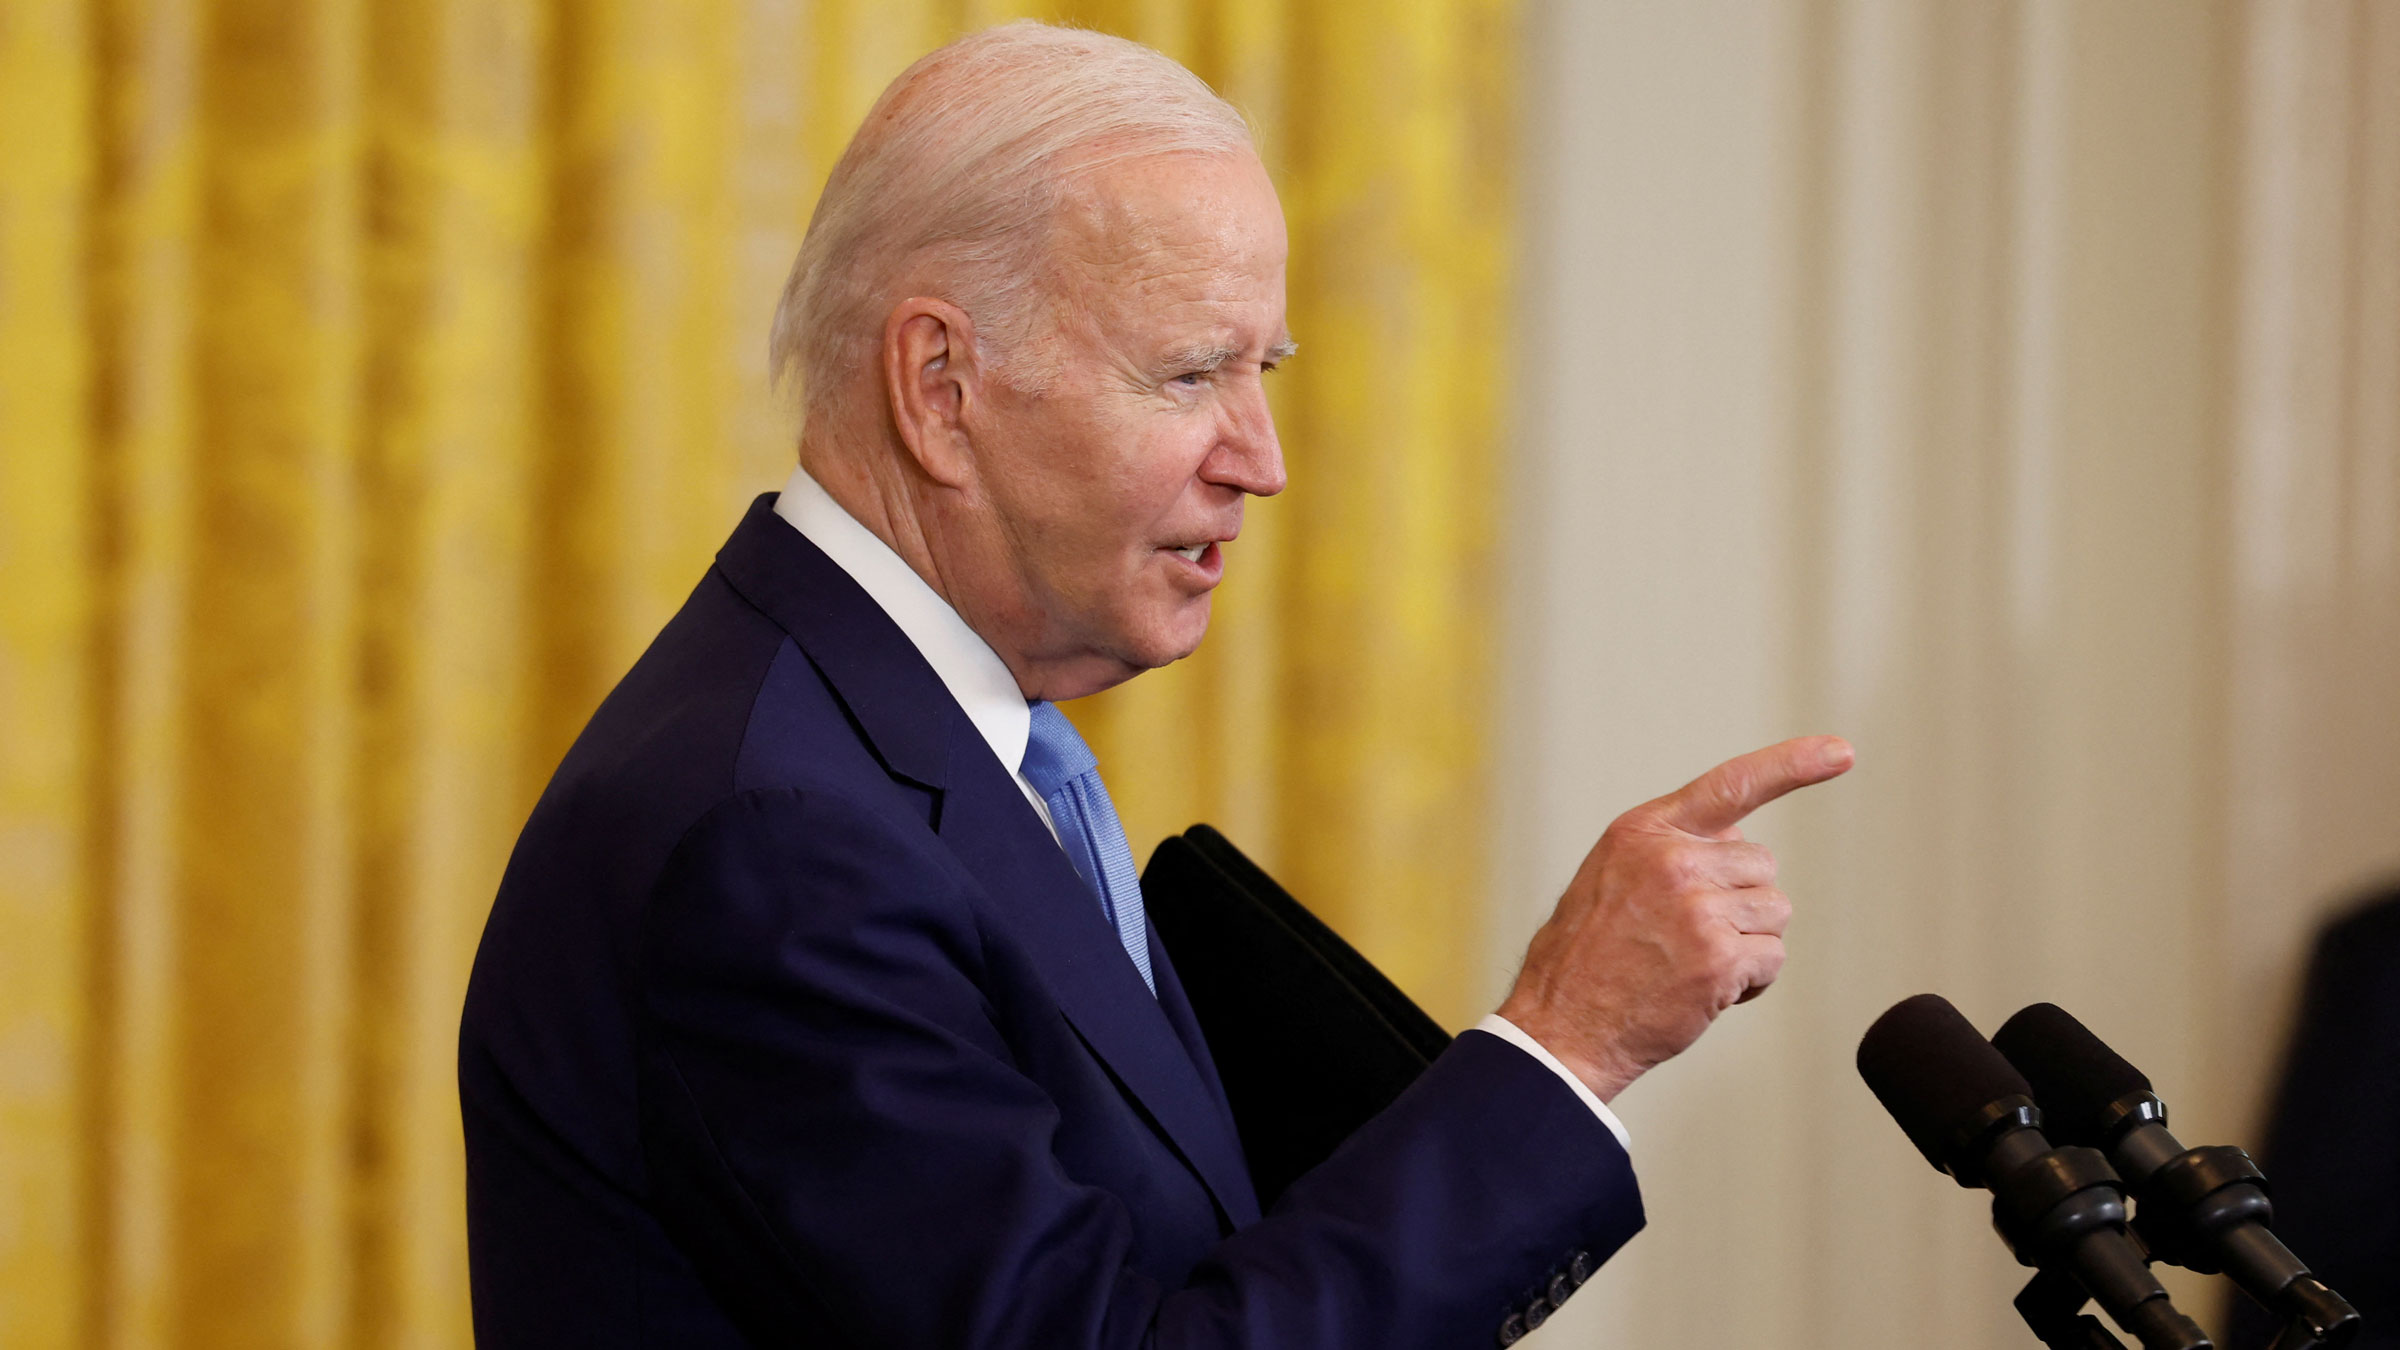 During a news conference on Thursday, US President Joe Biden said: “You’ll notice, I have never once — not one single time — suggested to the Justice Department what they should do or not do on whether to bring any charges or not bring any charges. I’m honest.”